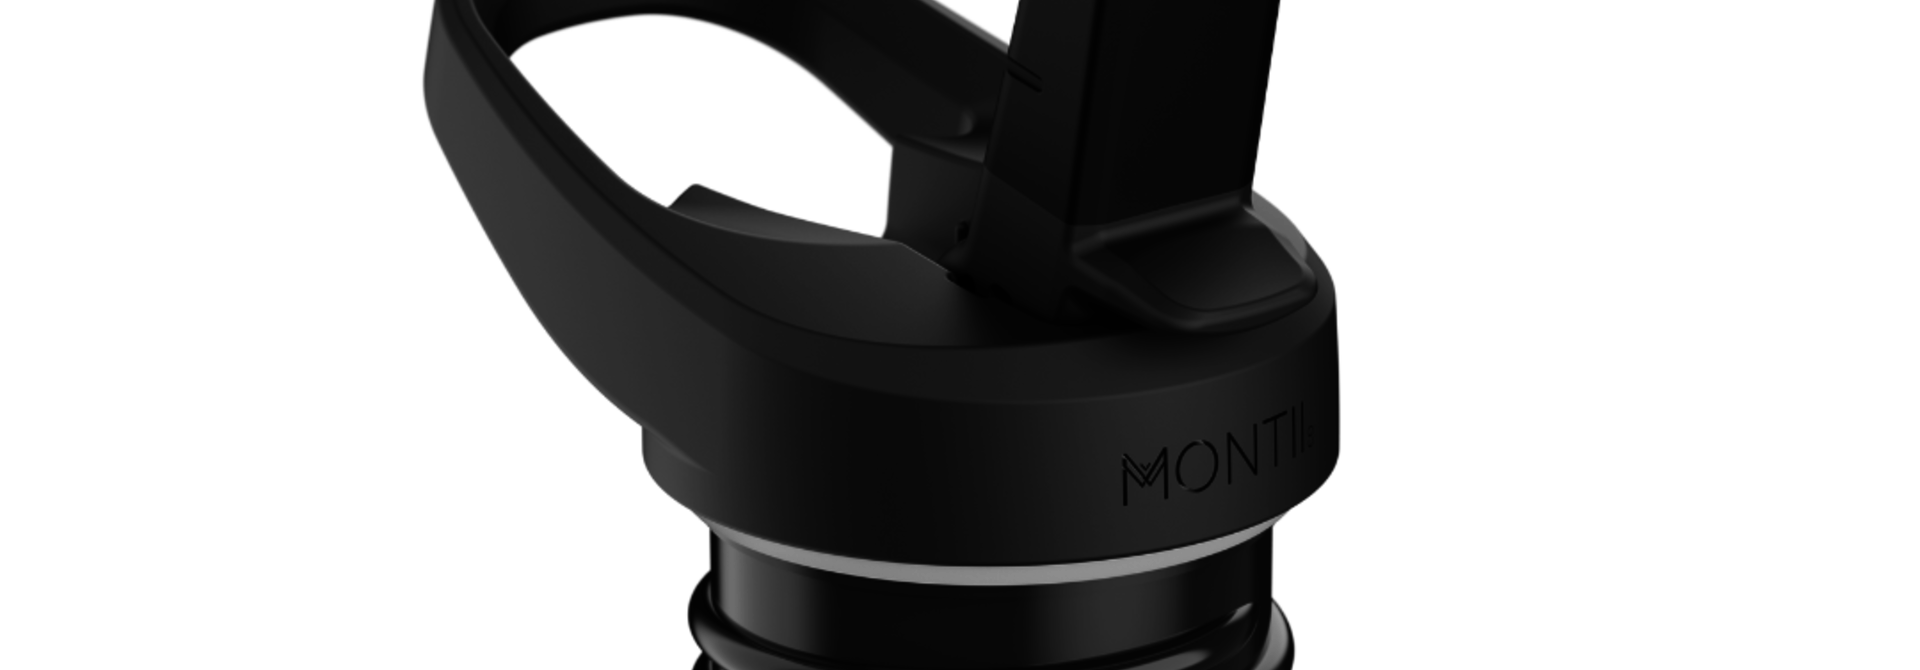 MontiiCo Sipper Lid 2.0 - Black